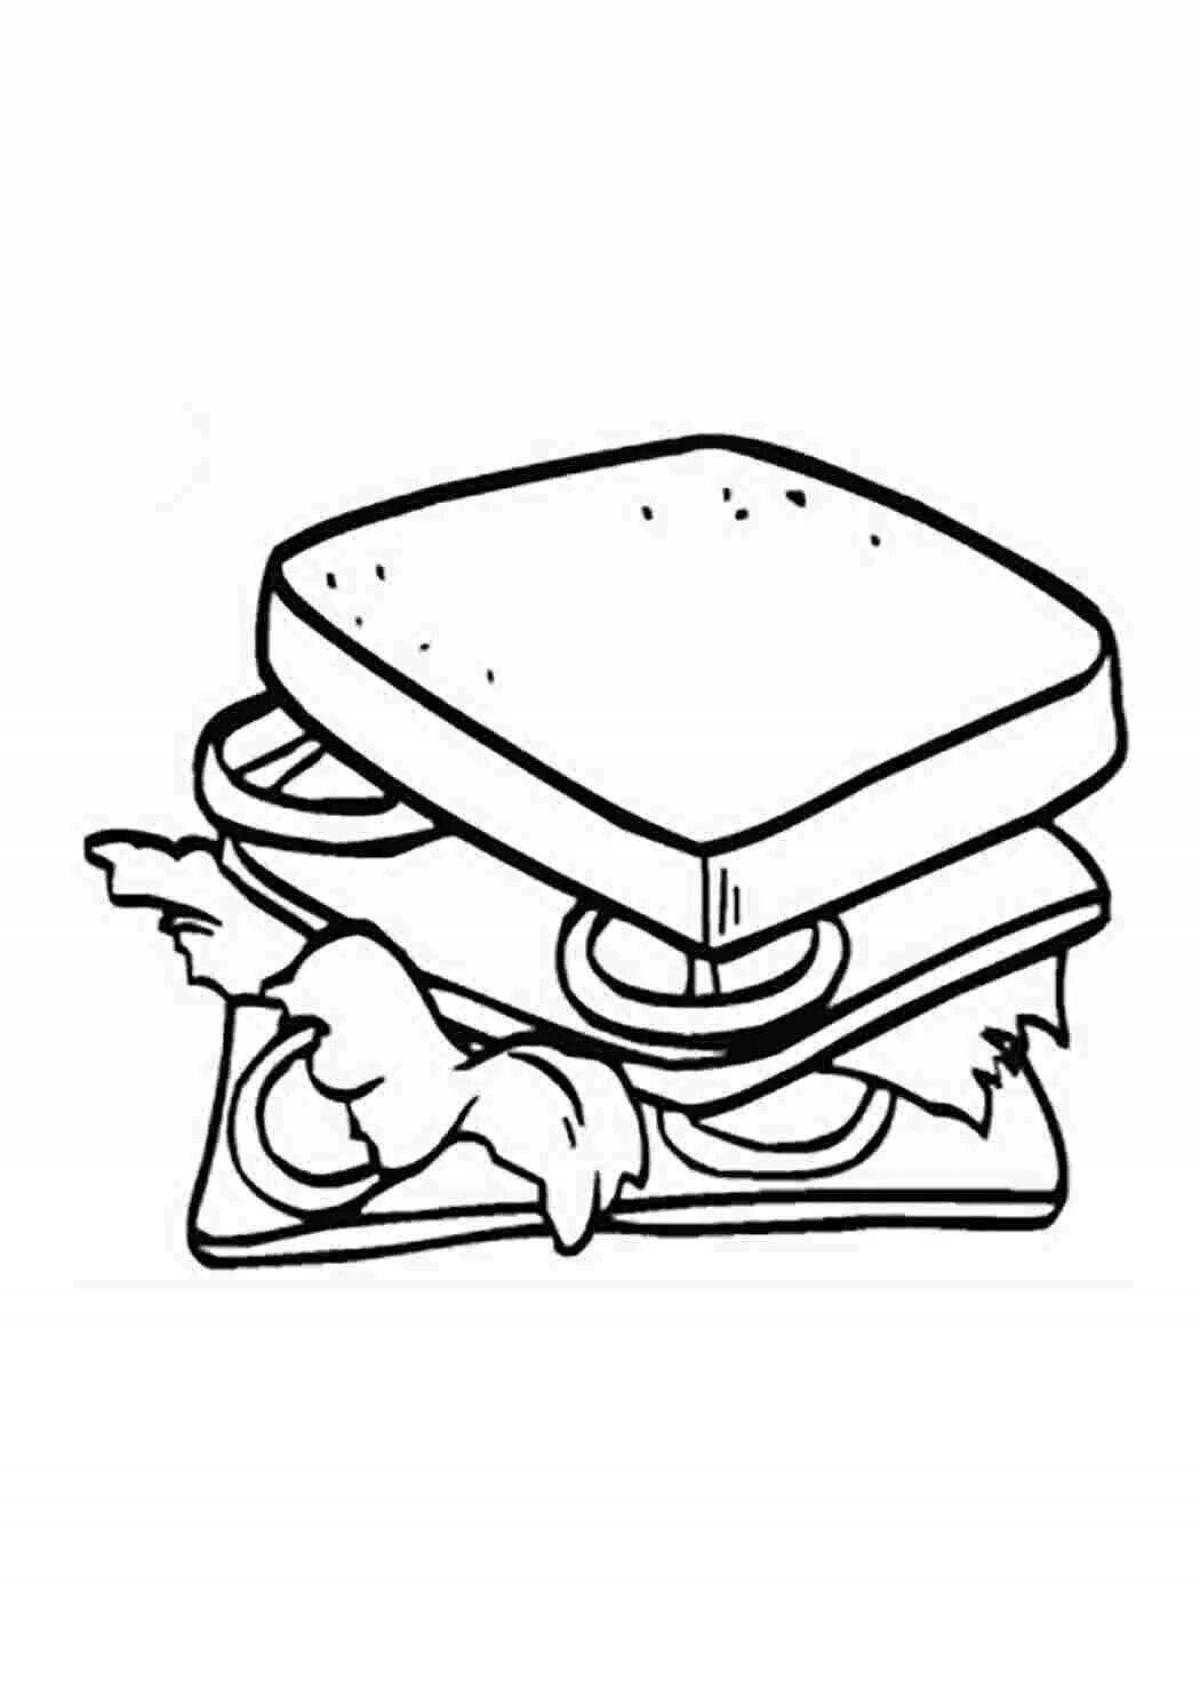 Creative sandwich coloring book for kids